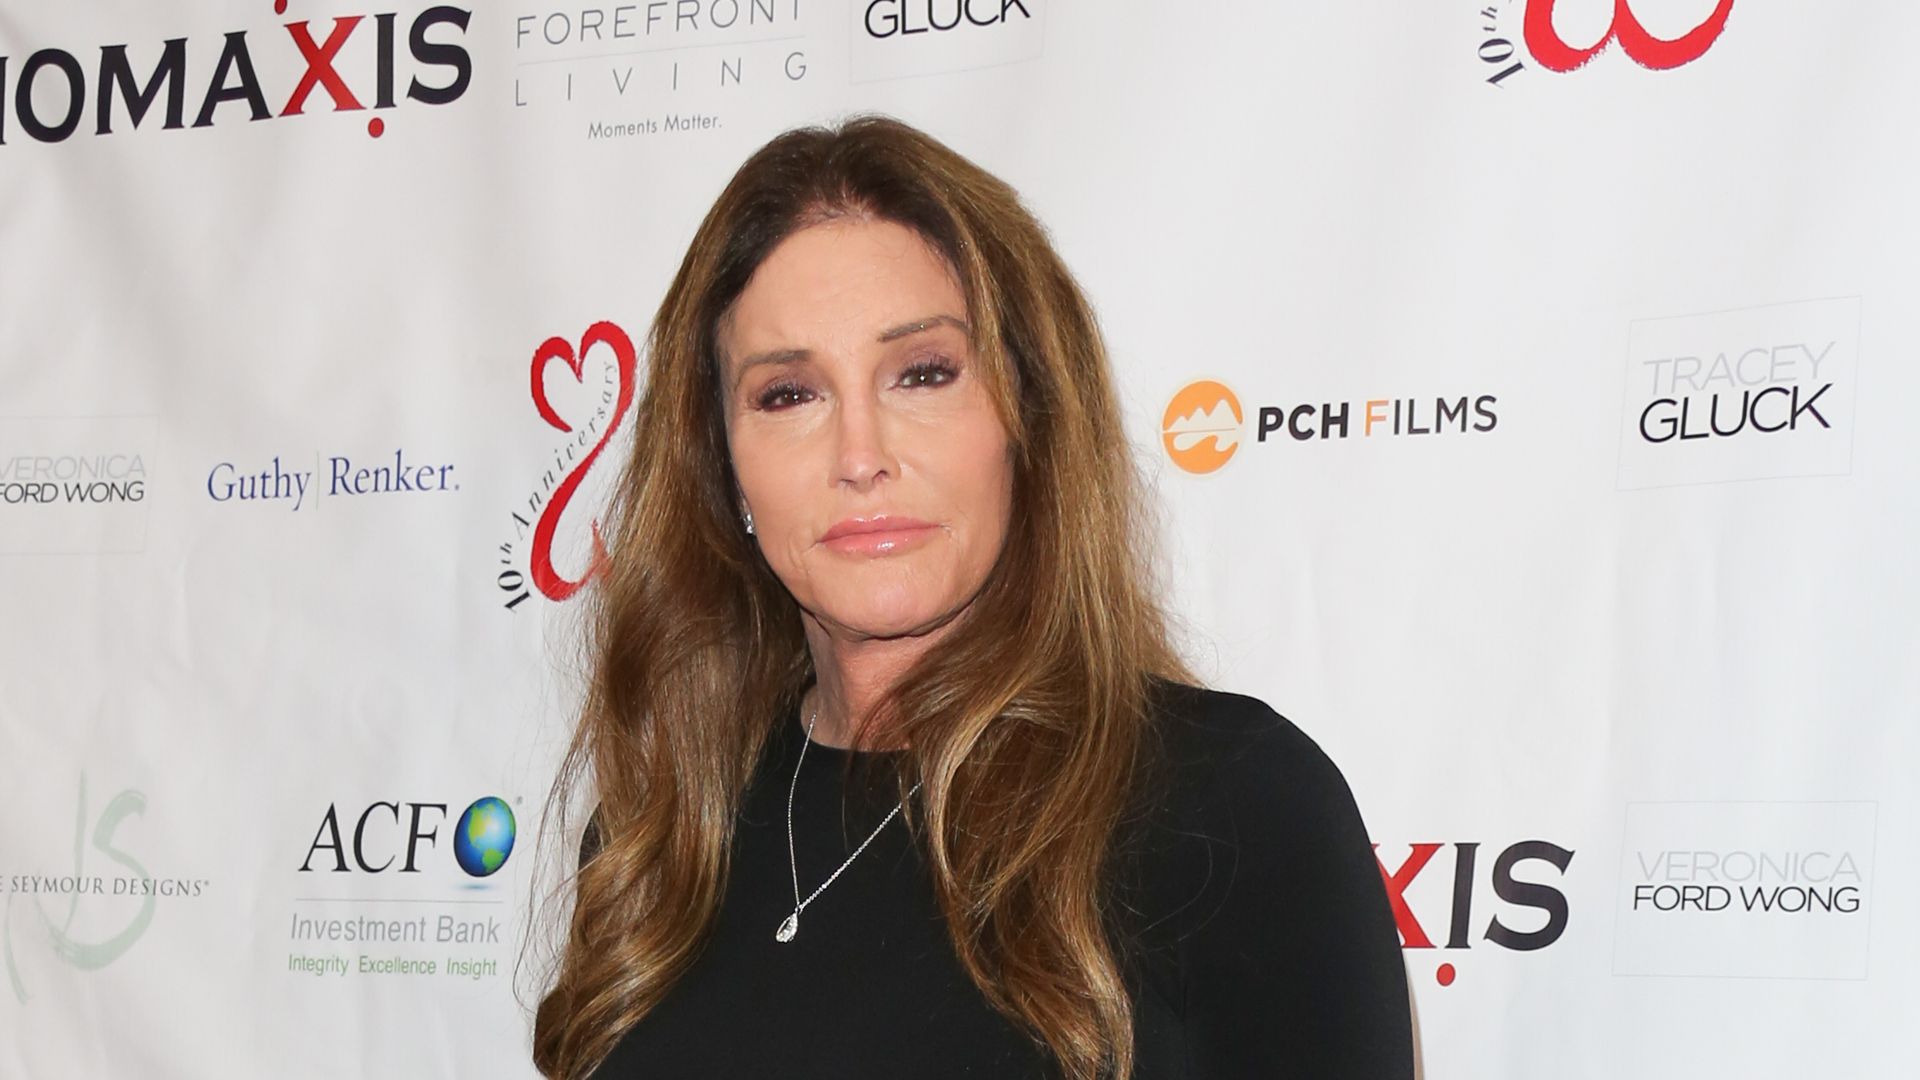 Caitlyn Jenner. Photo: Paul Archuleta/Getty Images